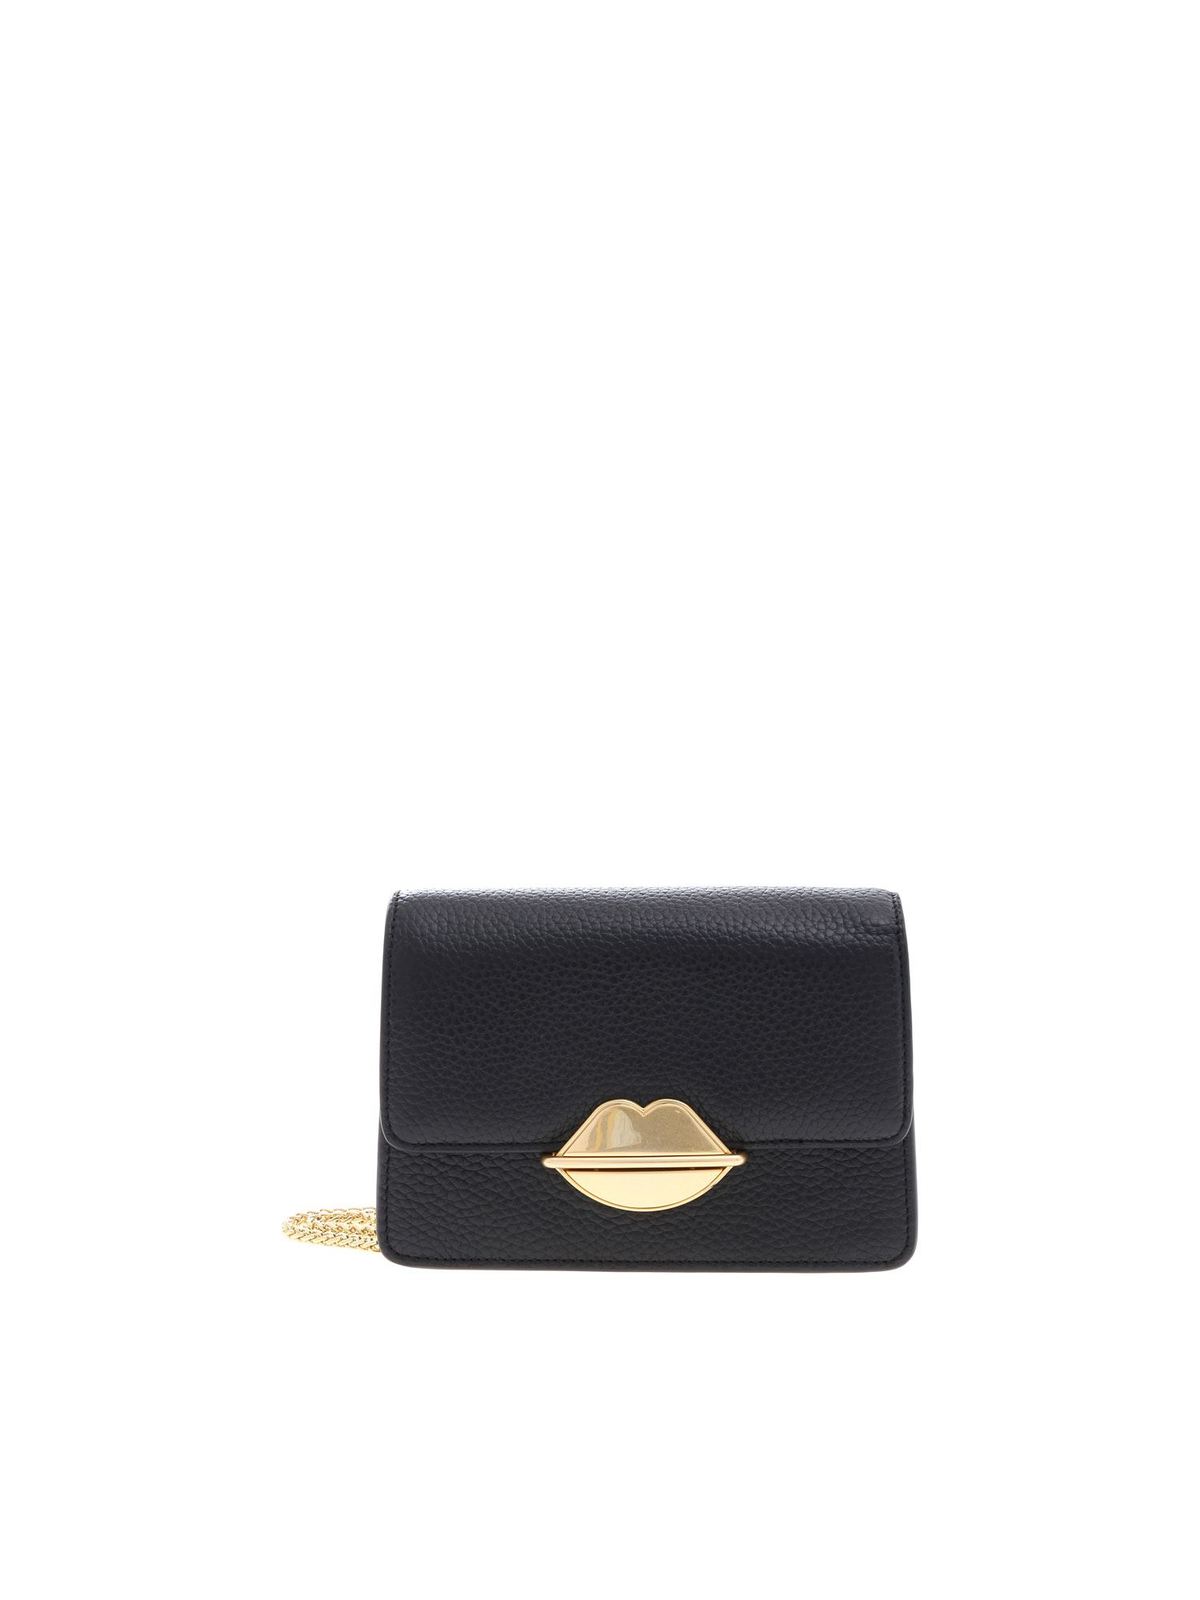 Lulu Guinness Polly Bag In Black Leather In Negro